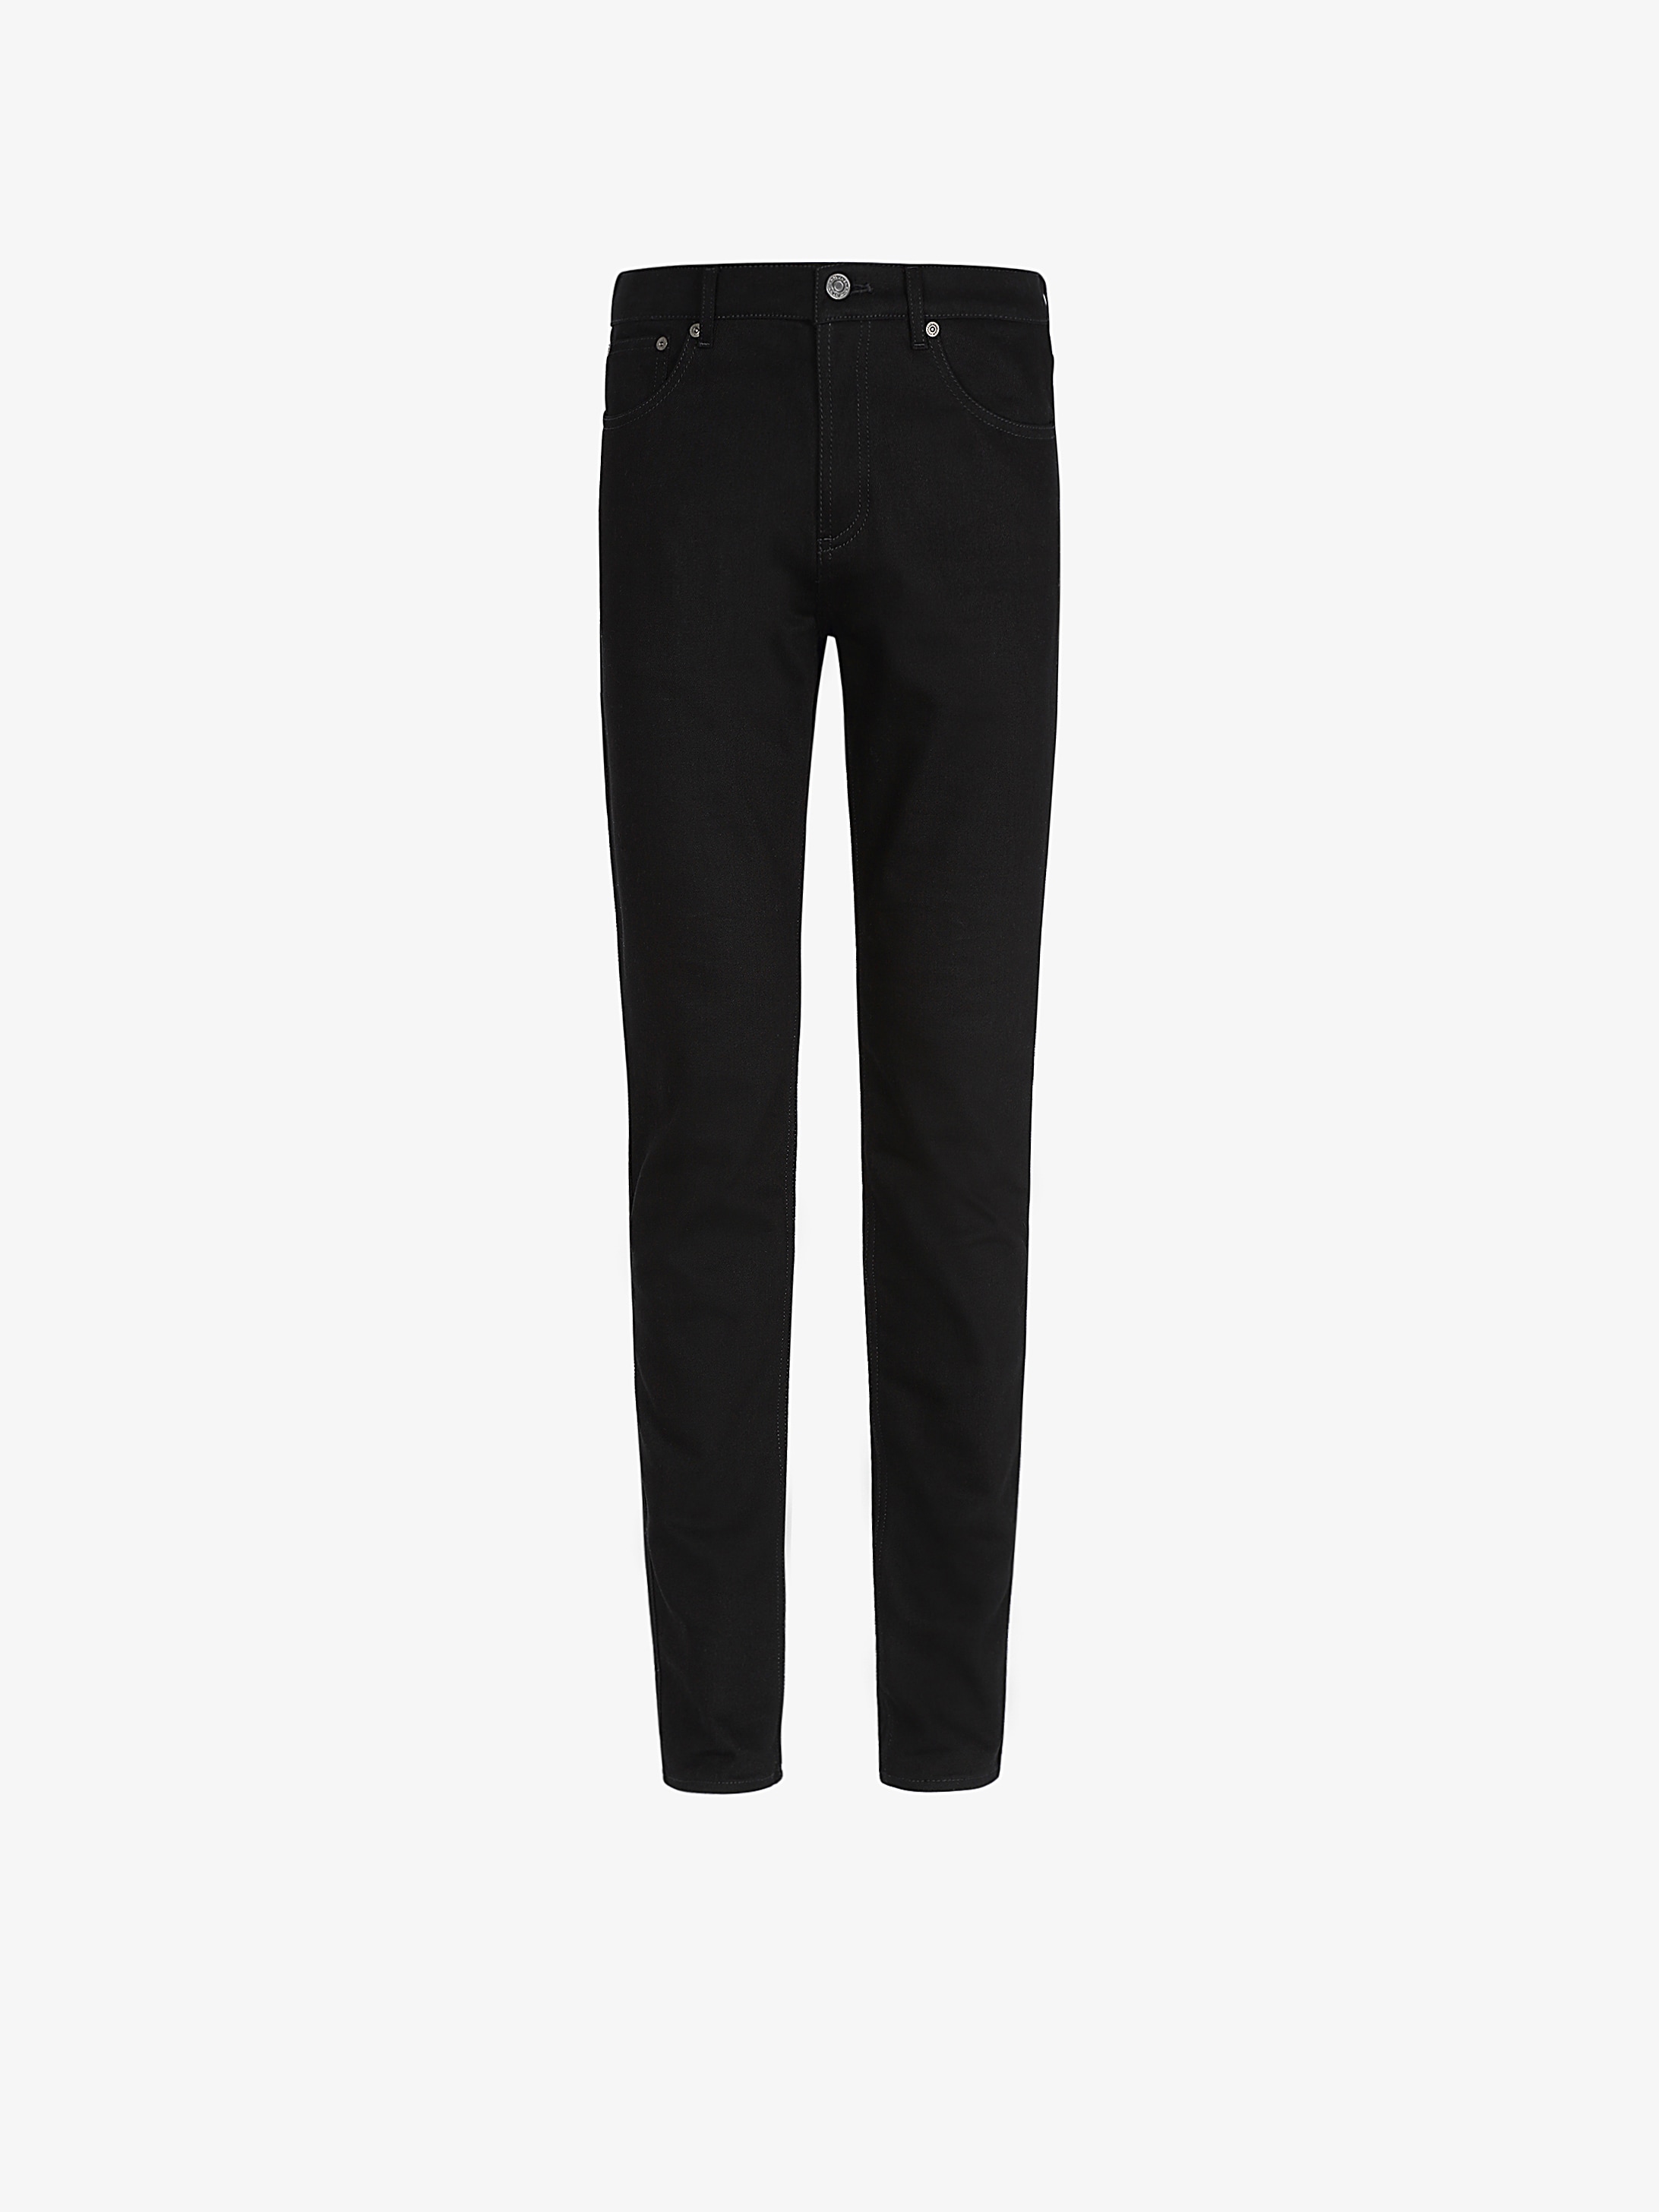 black givenchy jeans